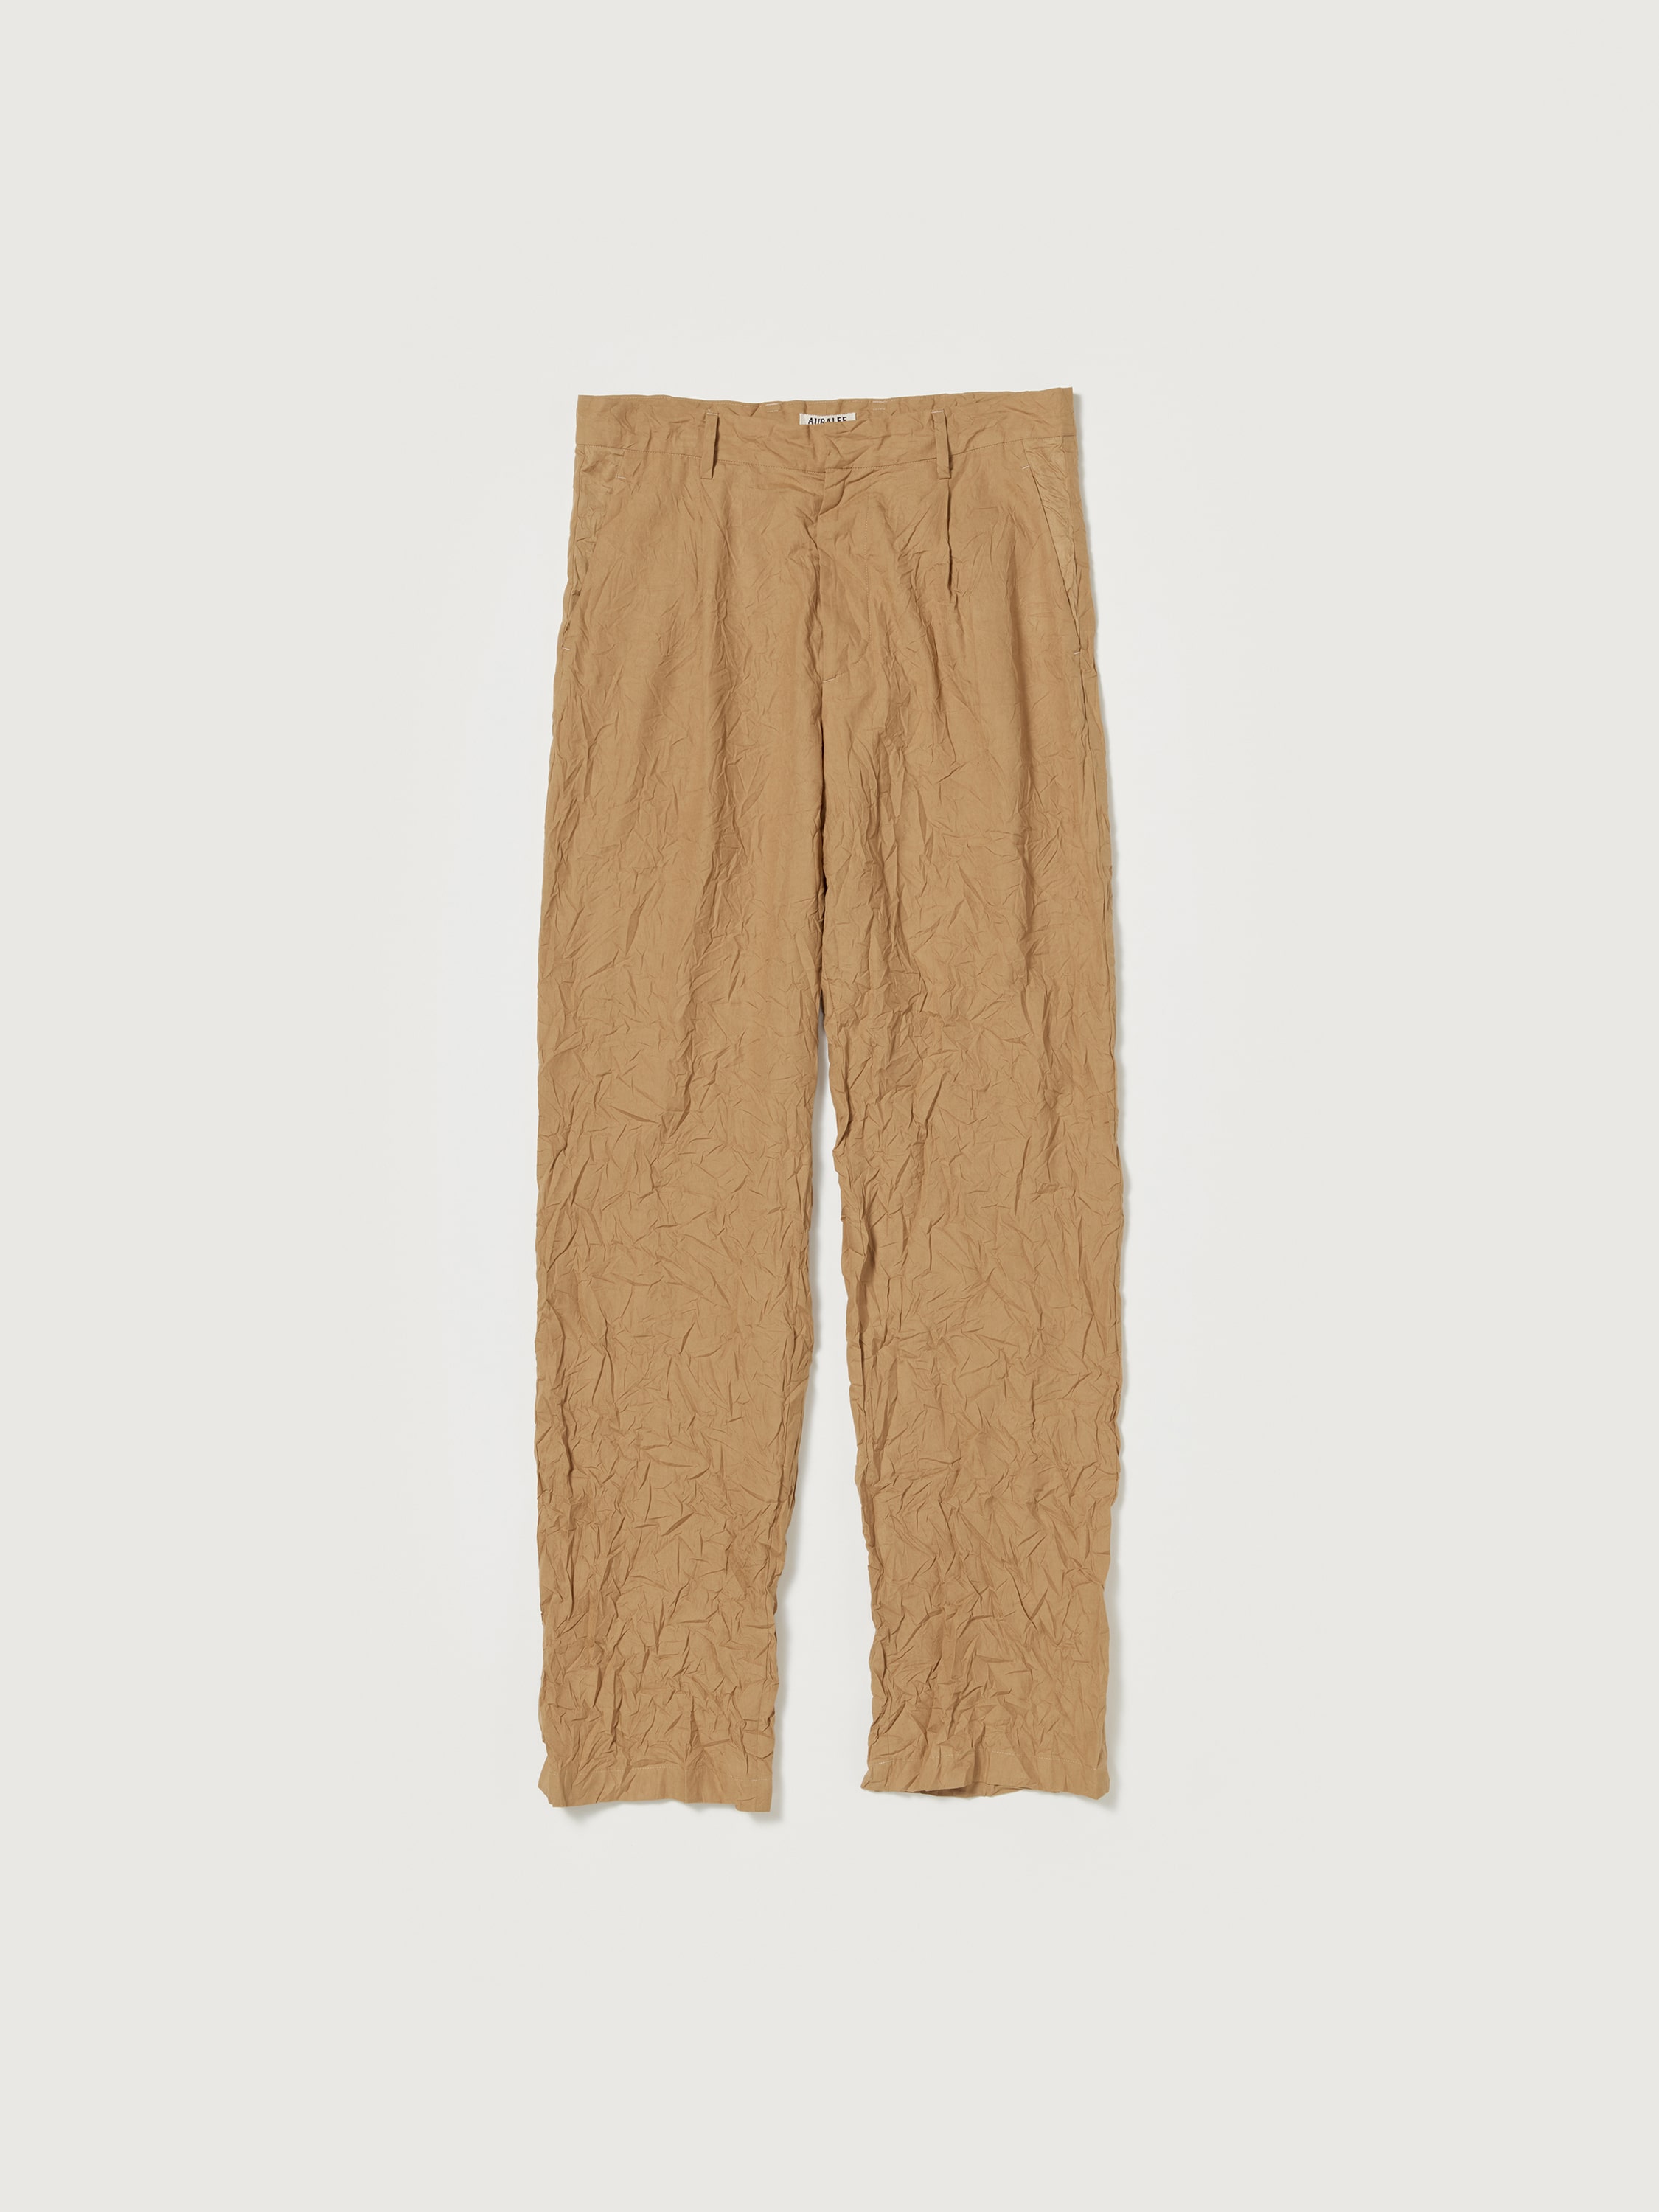 WRINKLED WASHED FINX TWILL PANTS 詳細画像 BROWN 1